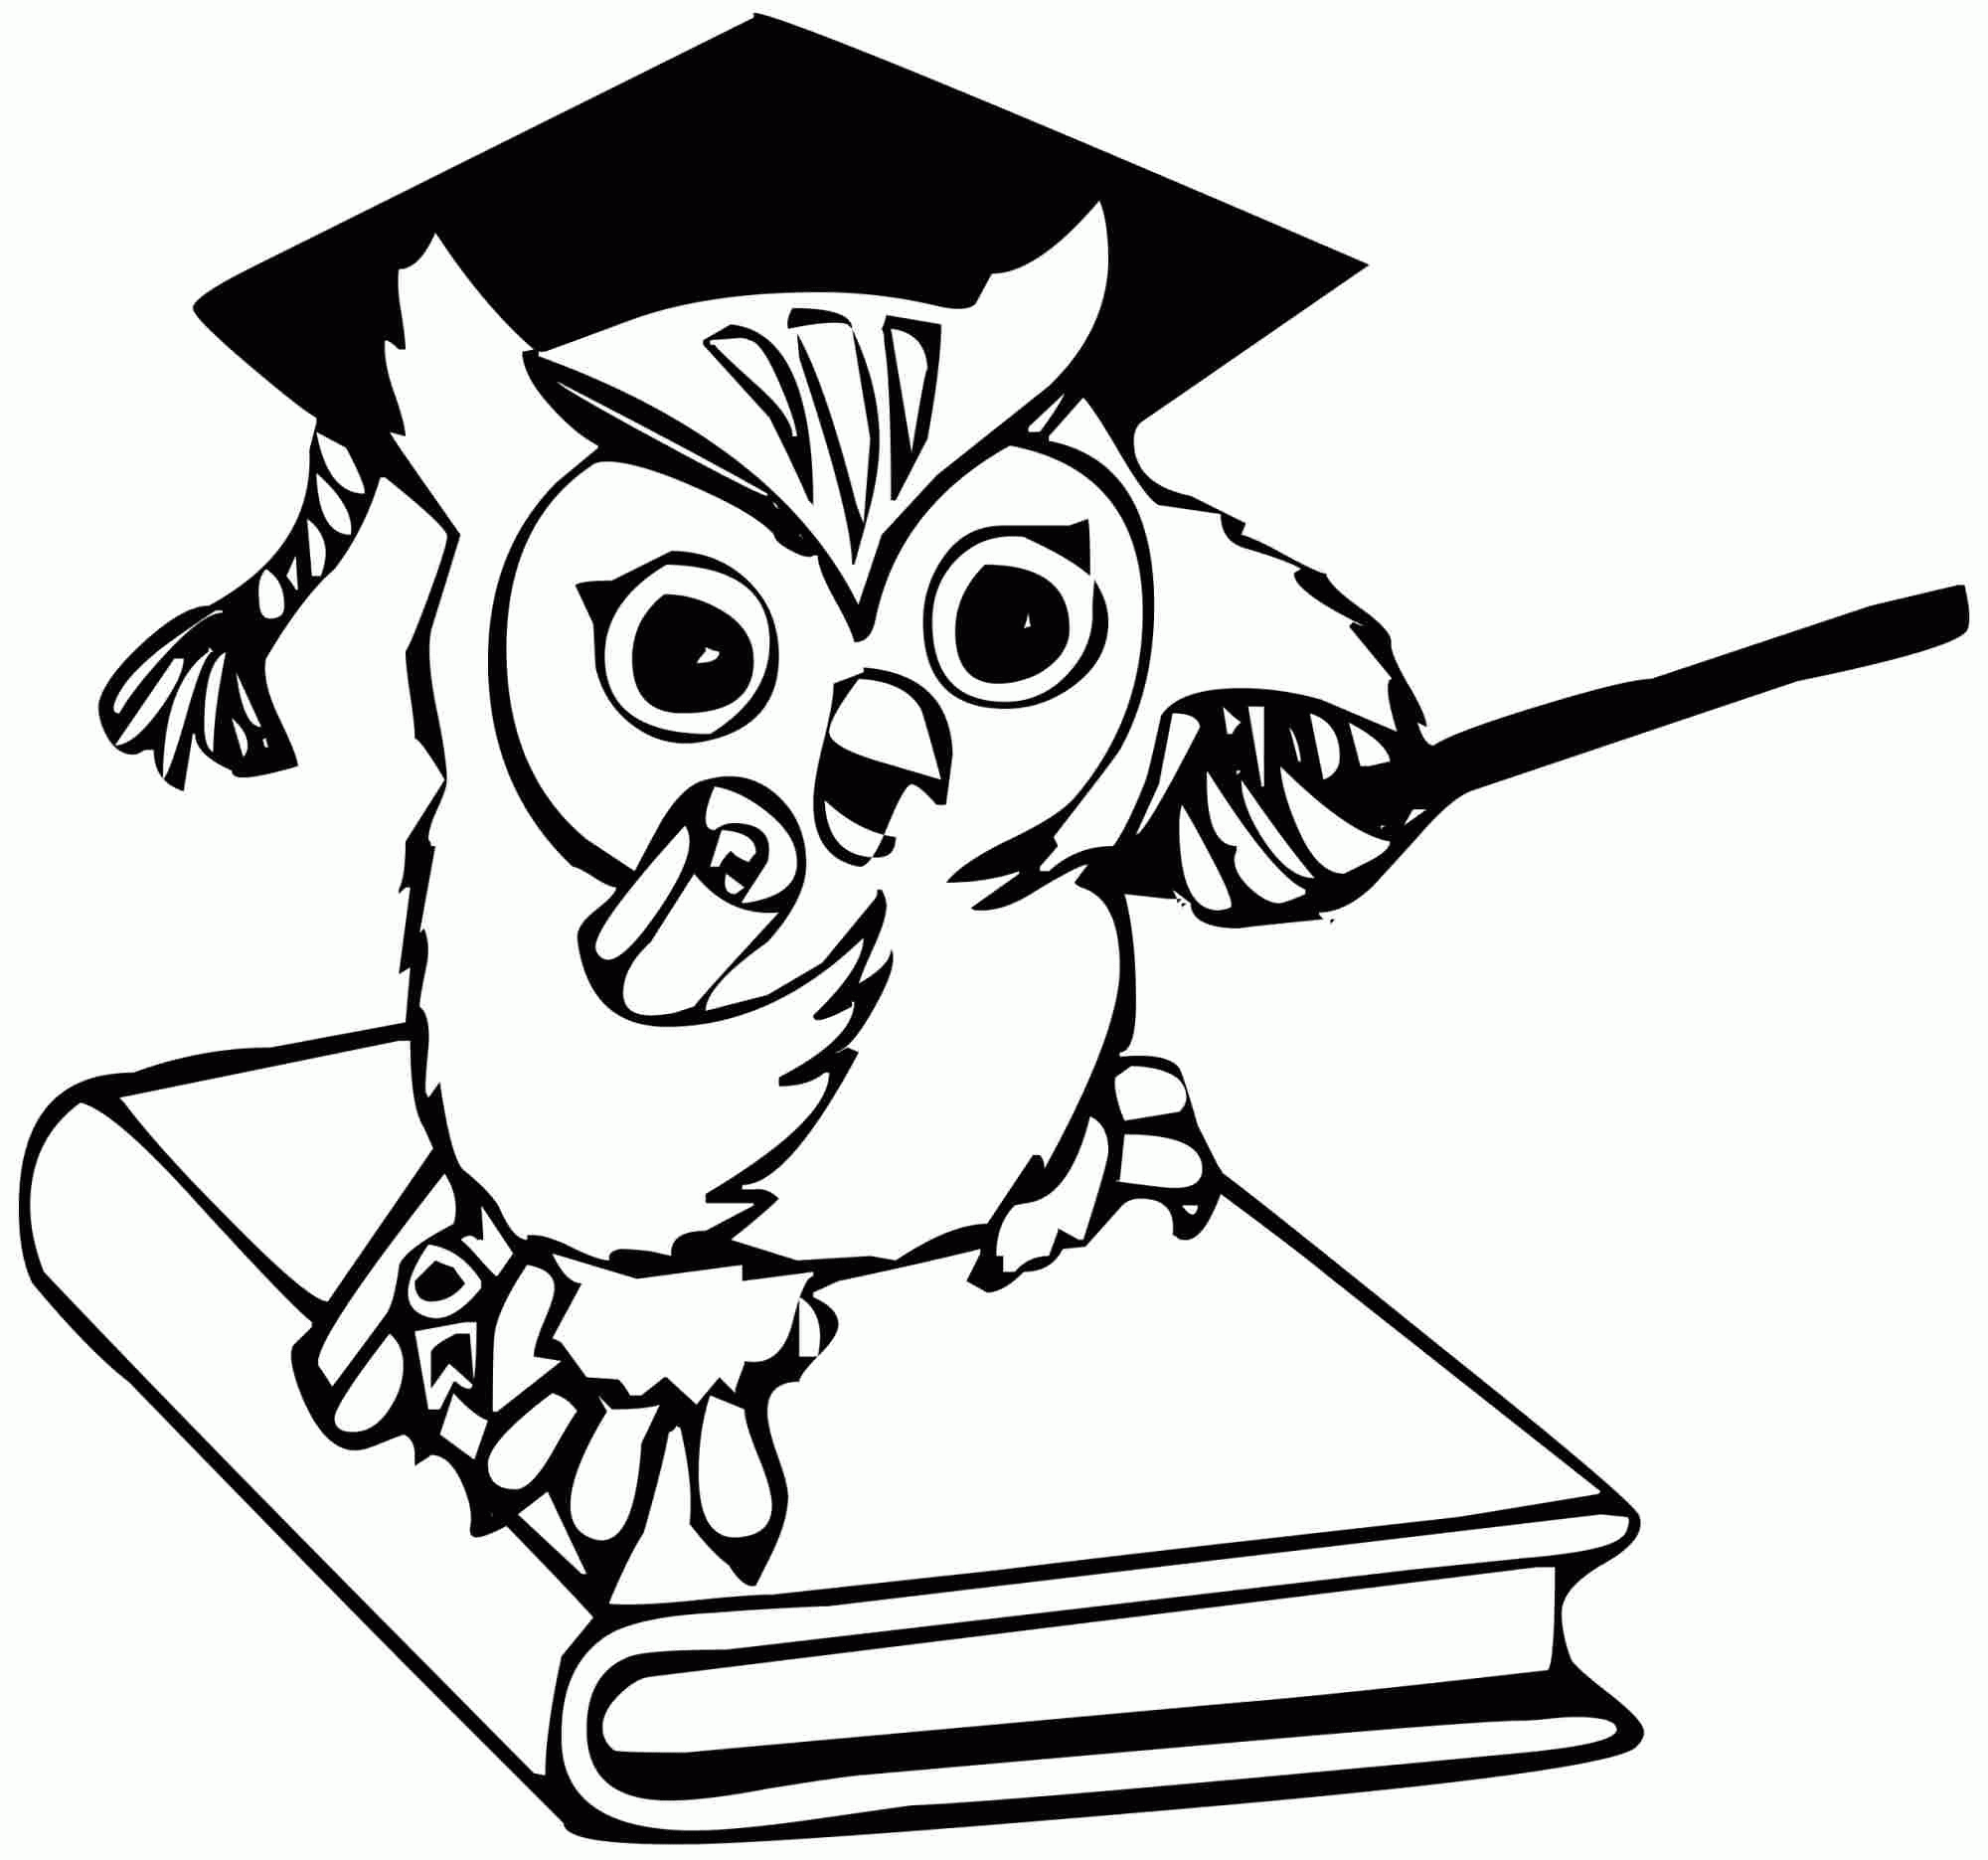 Owl Coloring Pages Preschool - Coloring Home